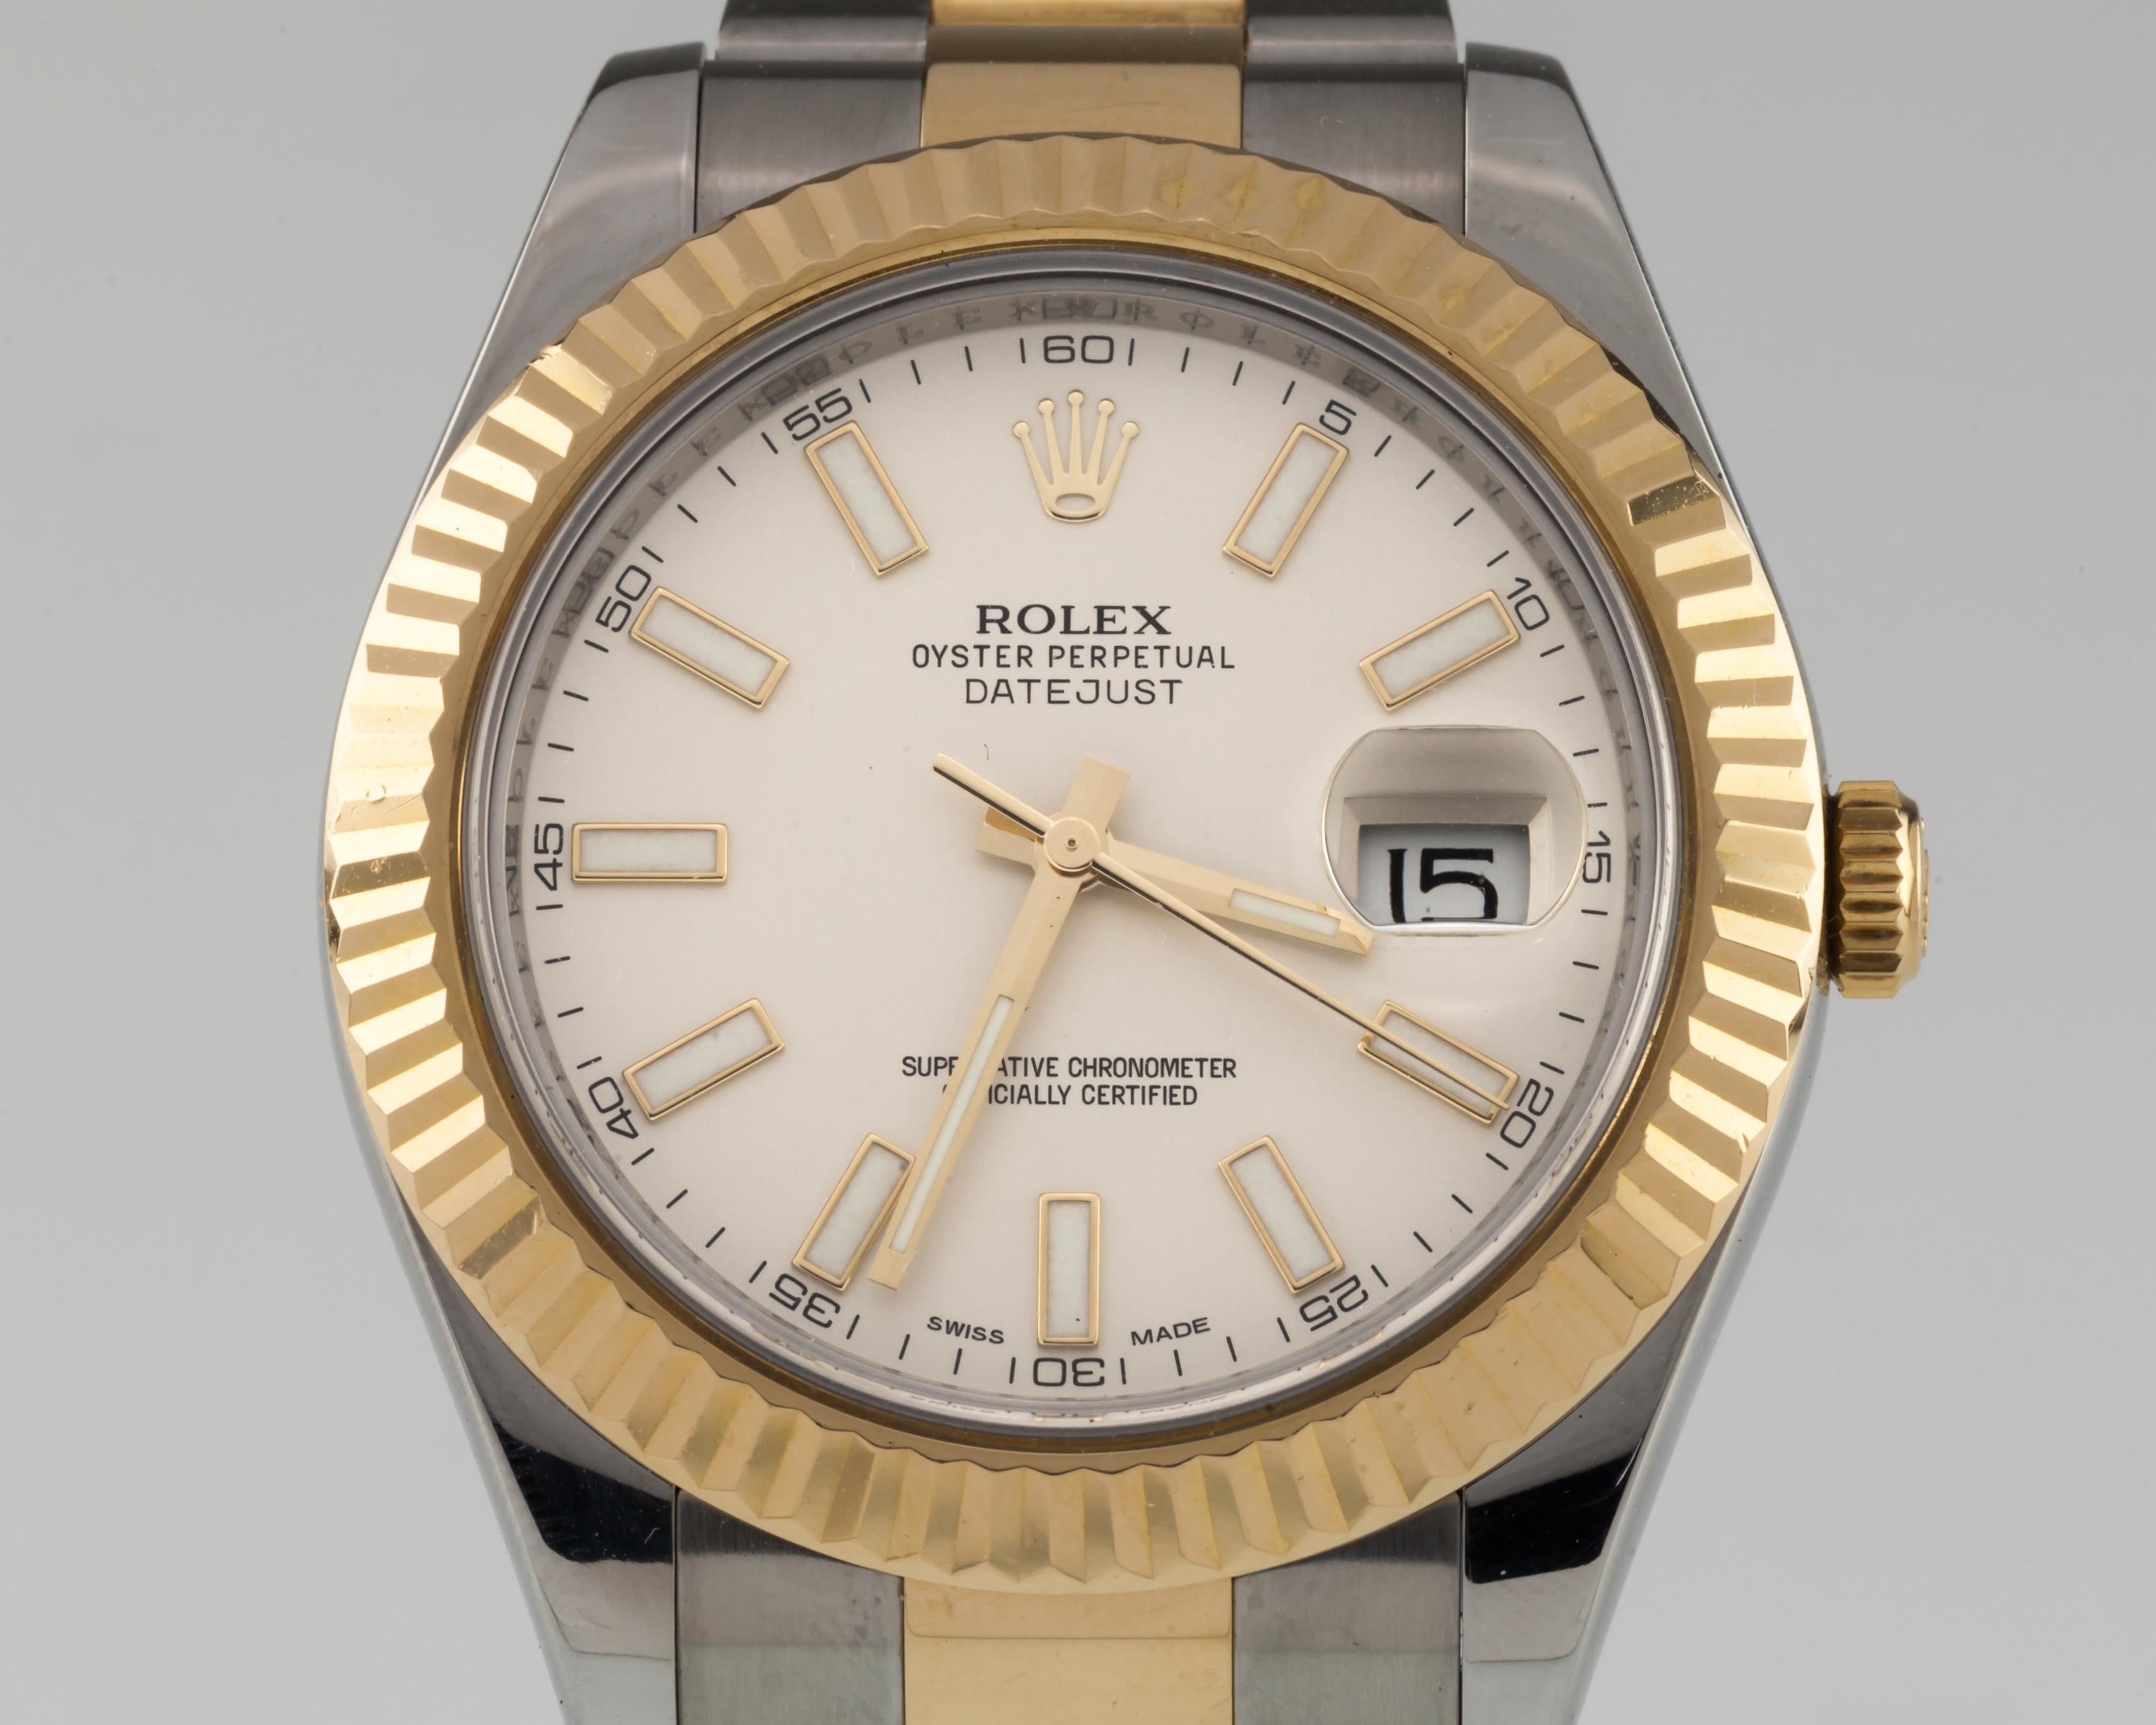 Model #116333
Serial #G7234XX
Movement #3136
Year: 2010
Stainless Steel Case w/ 18k Gold Crown and Fluted Bezel

41 mm in Diameter (43 mm w/ Crown)
Lug-to-Lug Distance = 50 mm
Lug-to-Lug Width = 21 mm
Thickness = 12 mm
Off-White Dial with